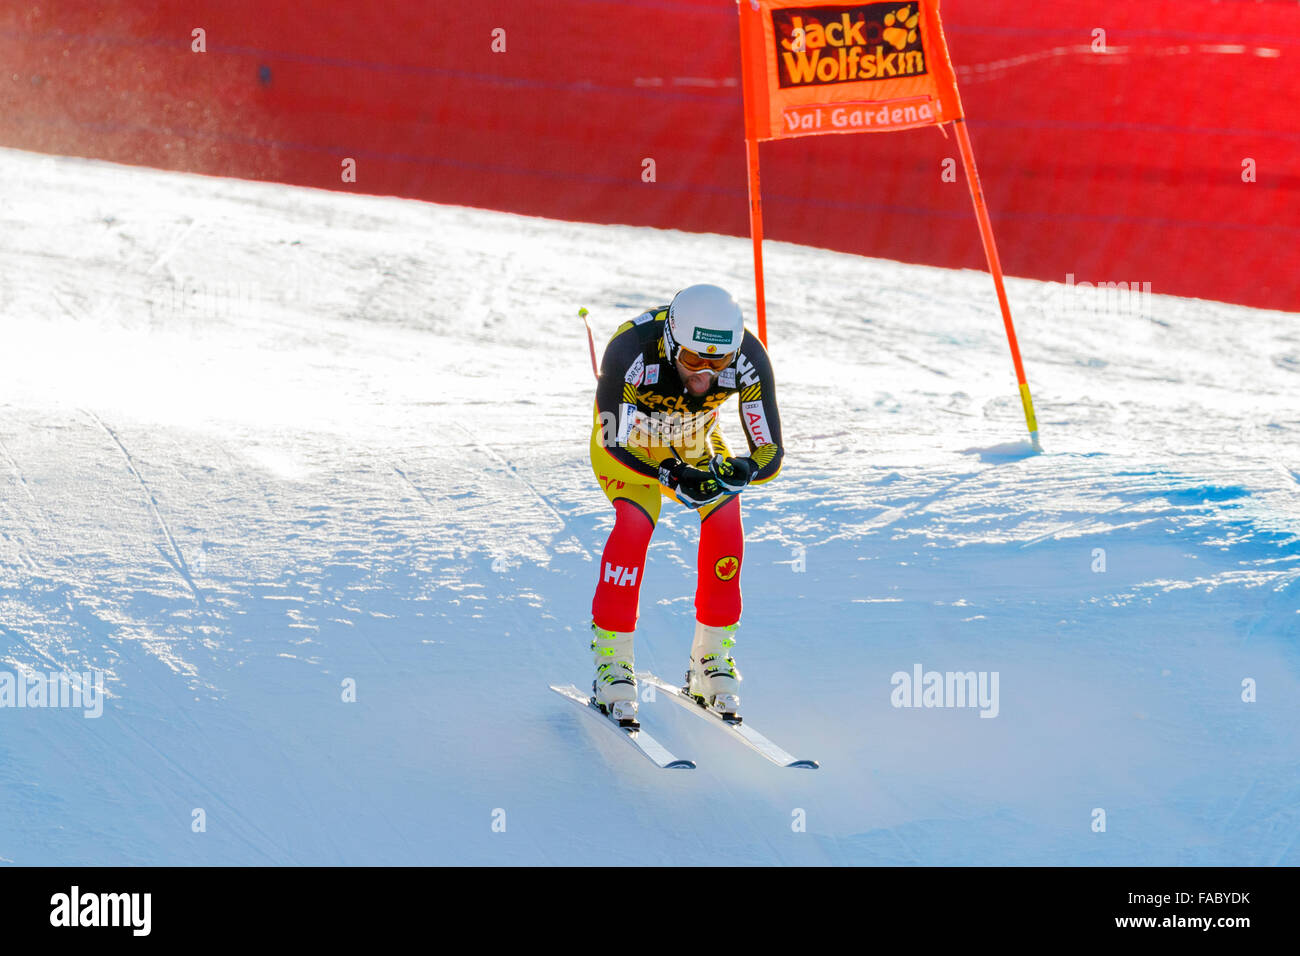 Val Gardena, Italy 19 December 2015. FRISCH Jeffrey (Can) competing in the Audi Fis Alpine Skiing World Cup Men's Downhill Race Stock Photo